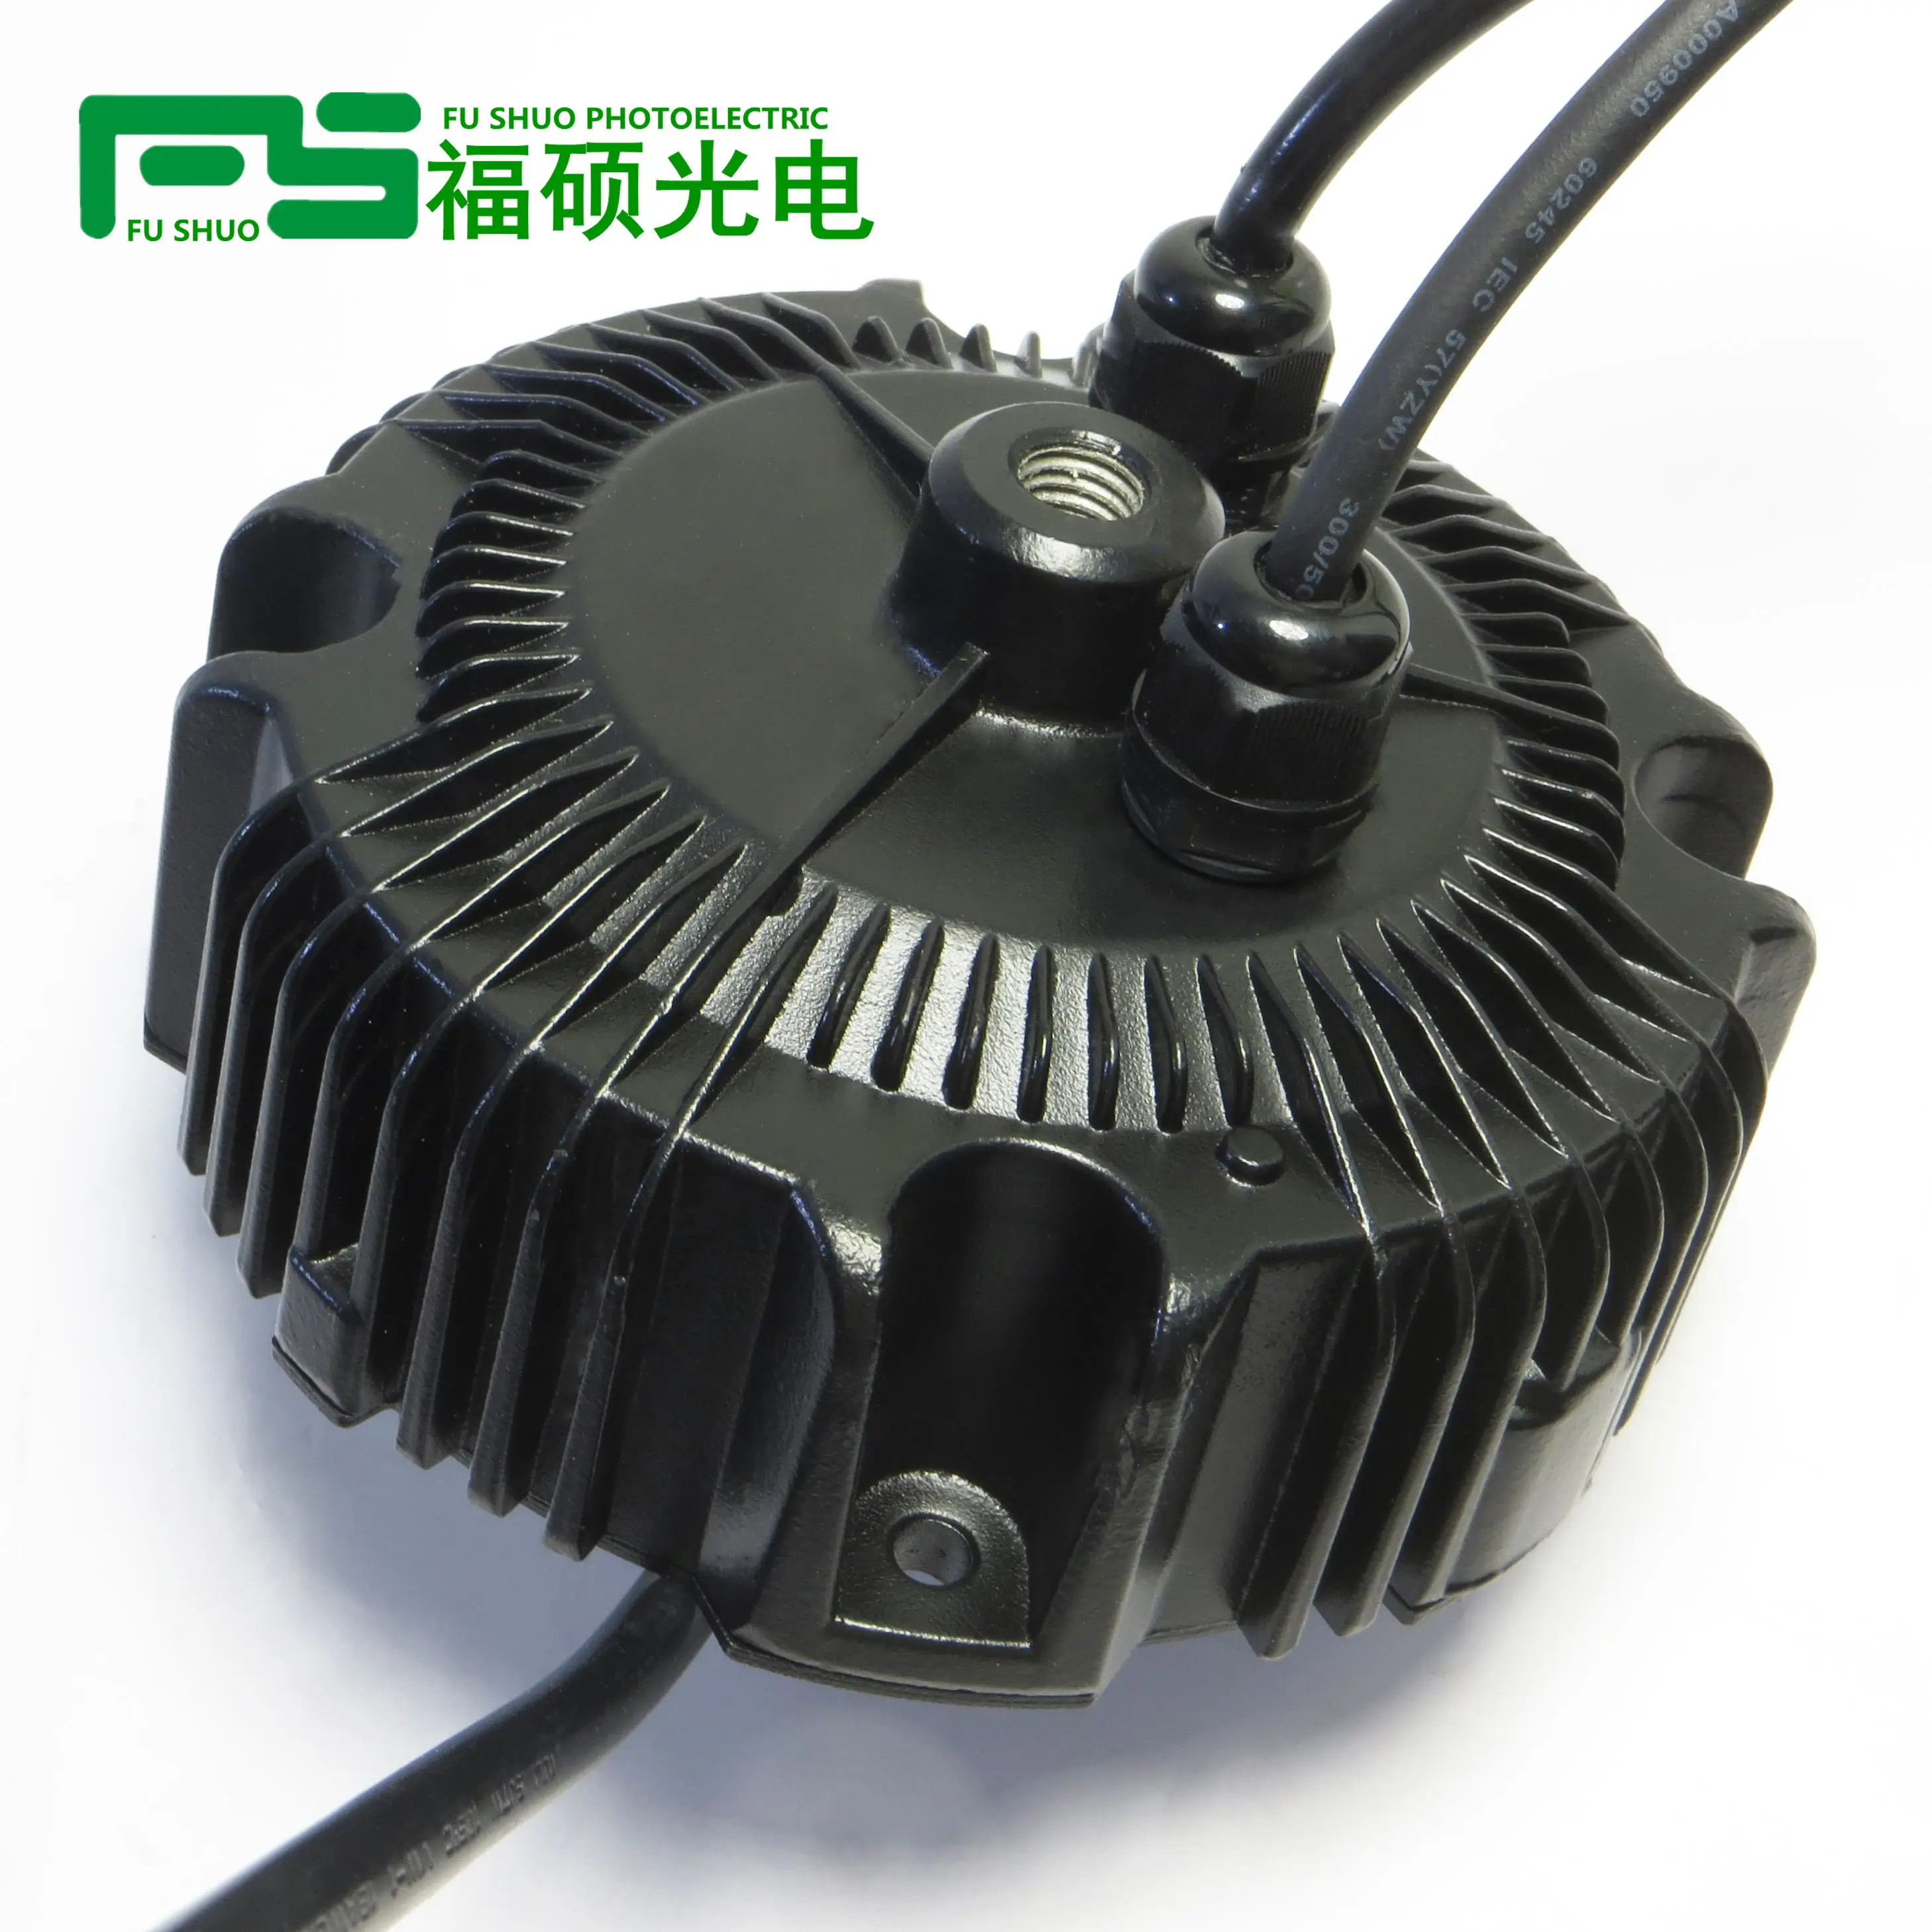 hbg-120-36 led power supply cxb3590 clu048 clu058 use constant current flicker free led grow light pwm 0-10vdc dimming driver